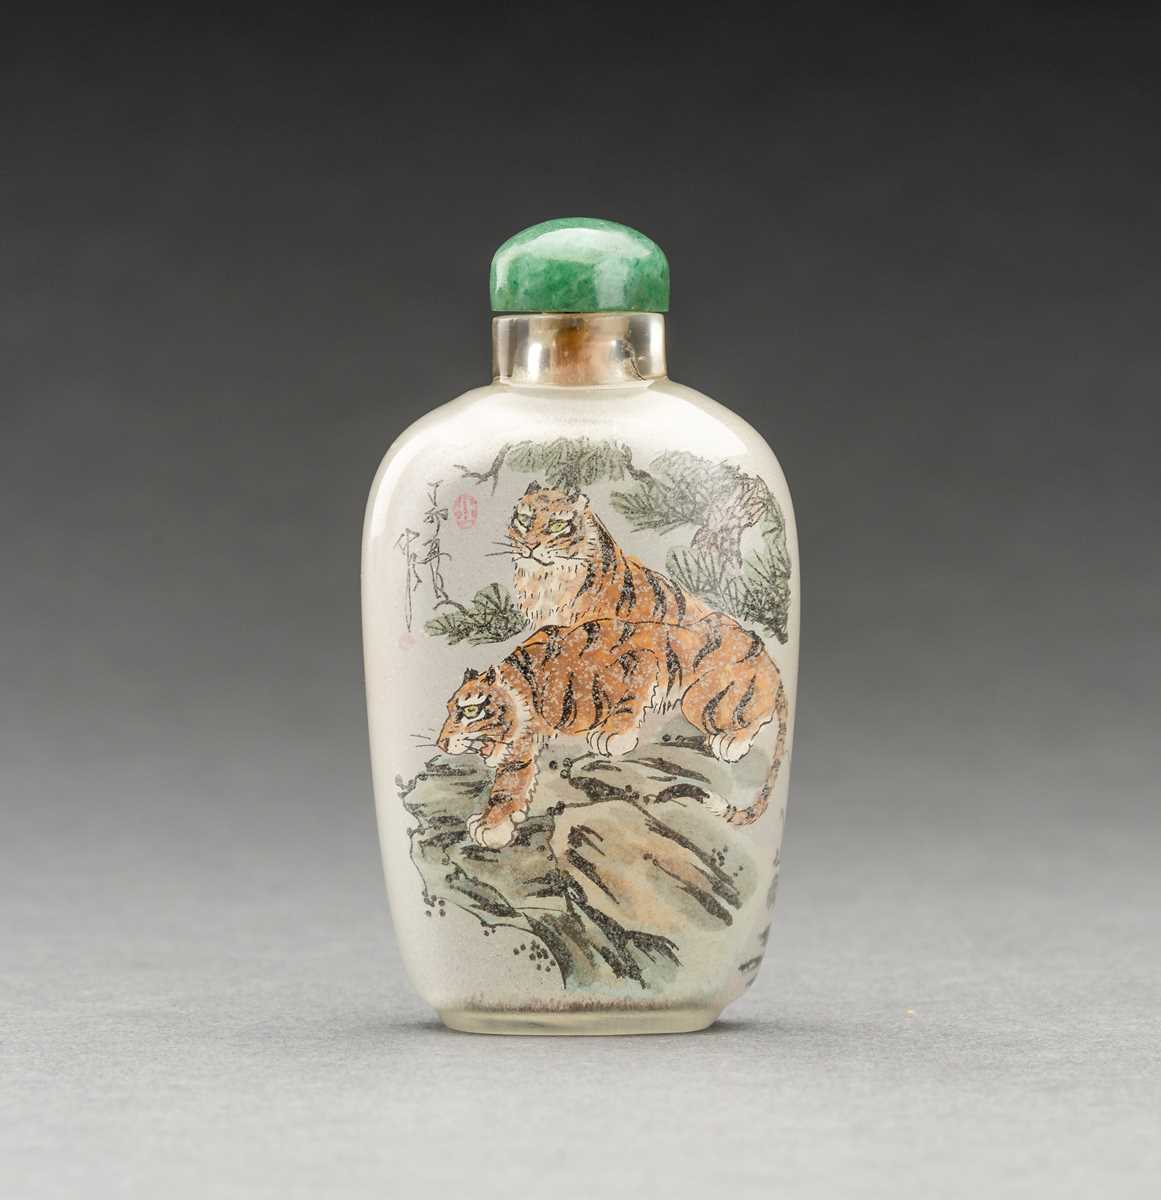 AN INSIDE-PAINTED ‘TIGER’ GLASS SNUFF BOTTLE